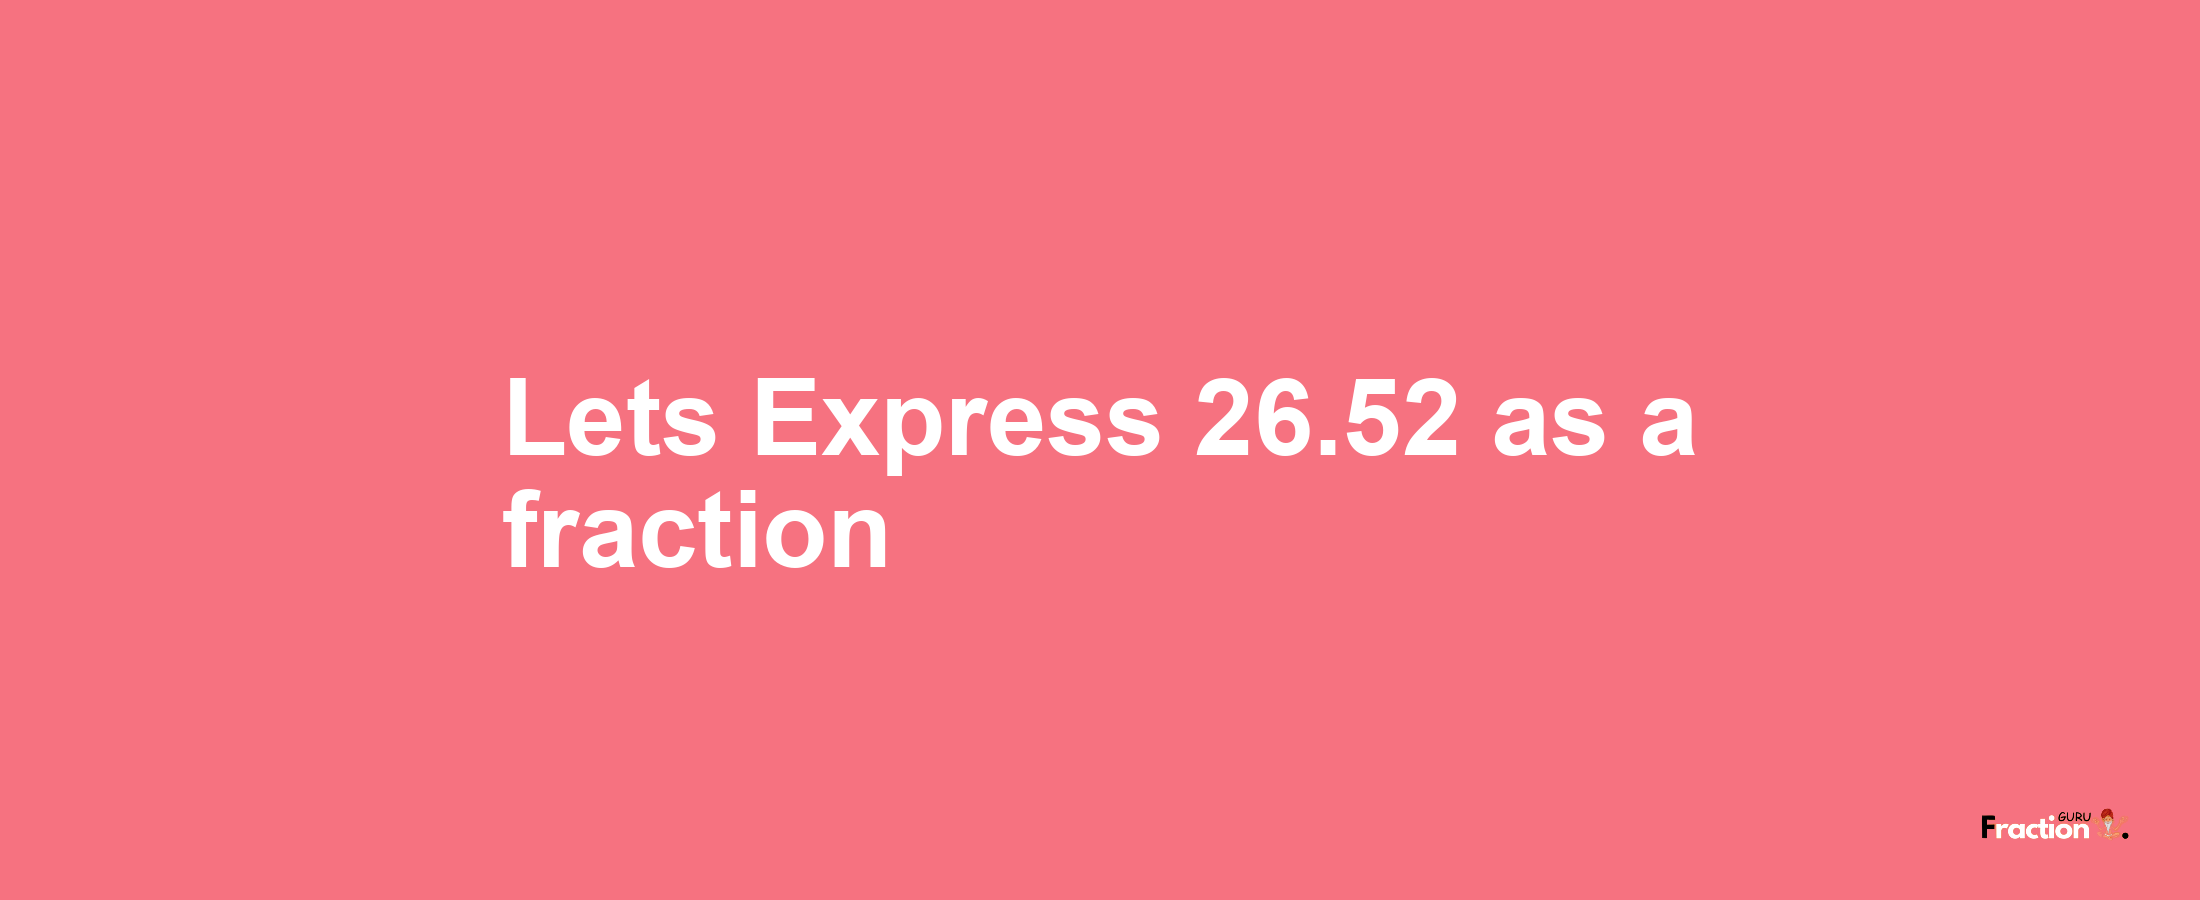 Lets Express 26.52 as afraction